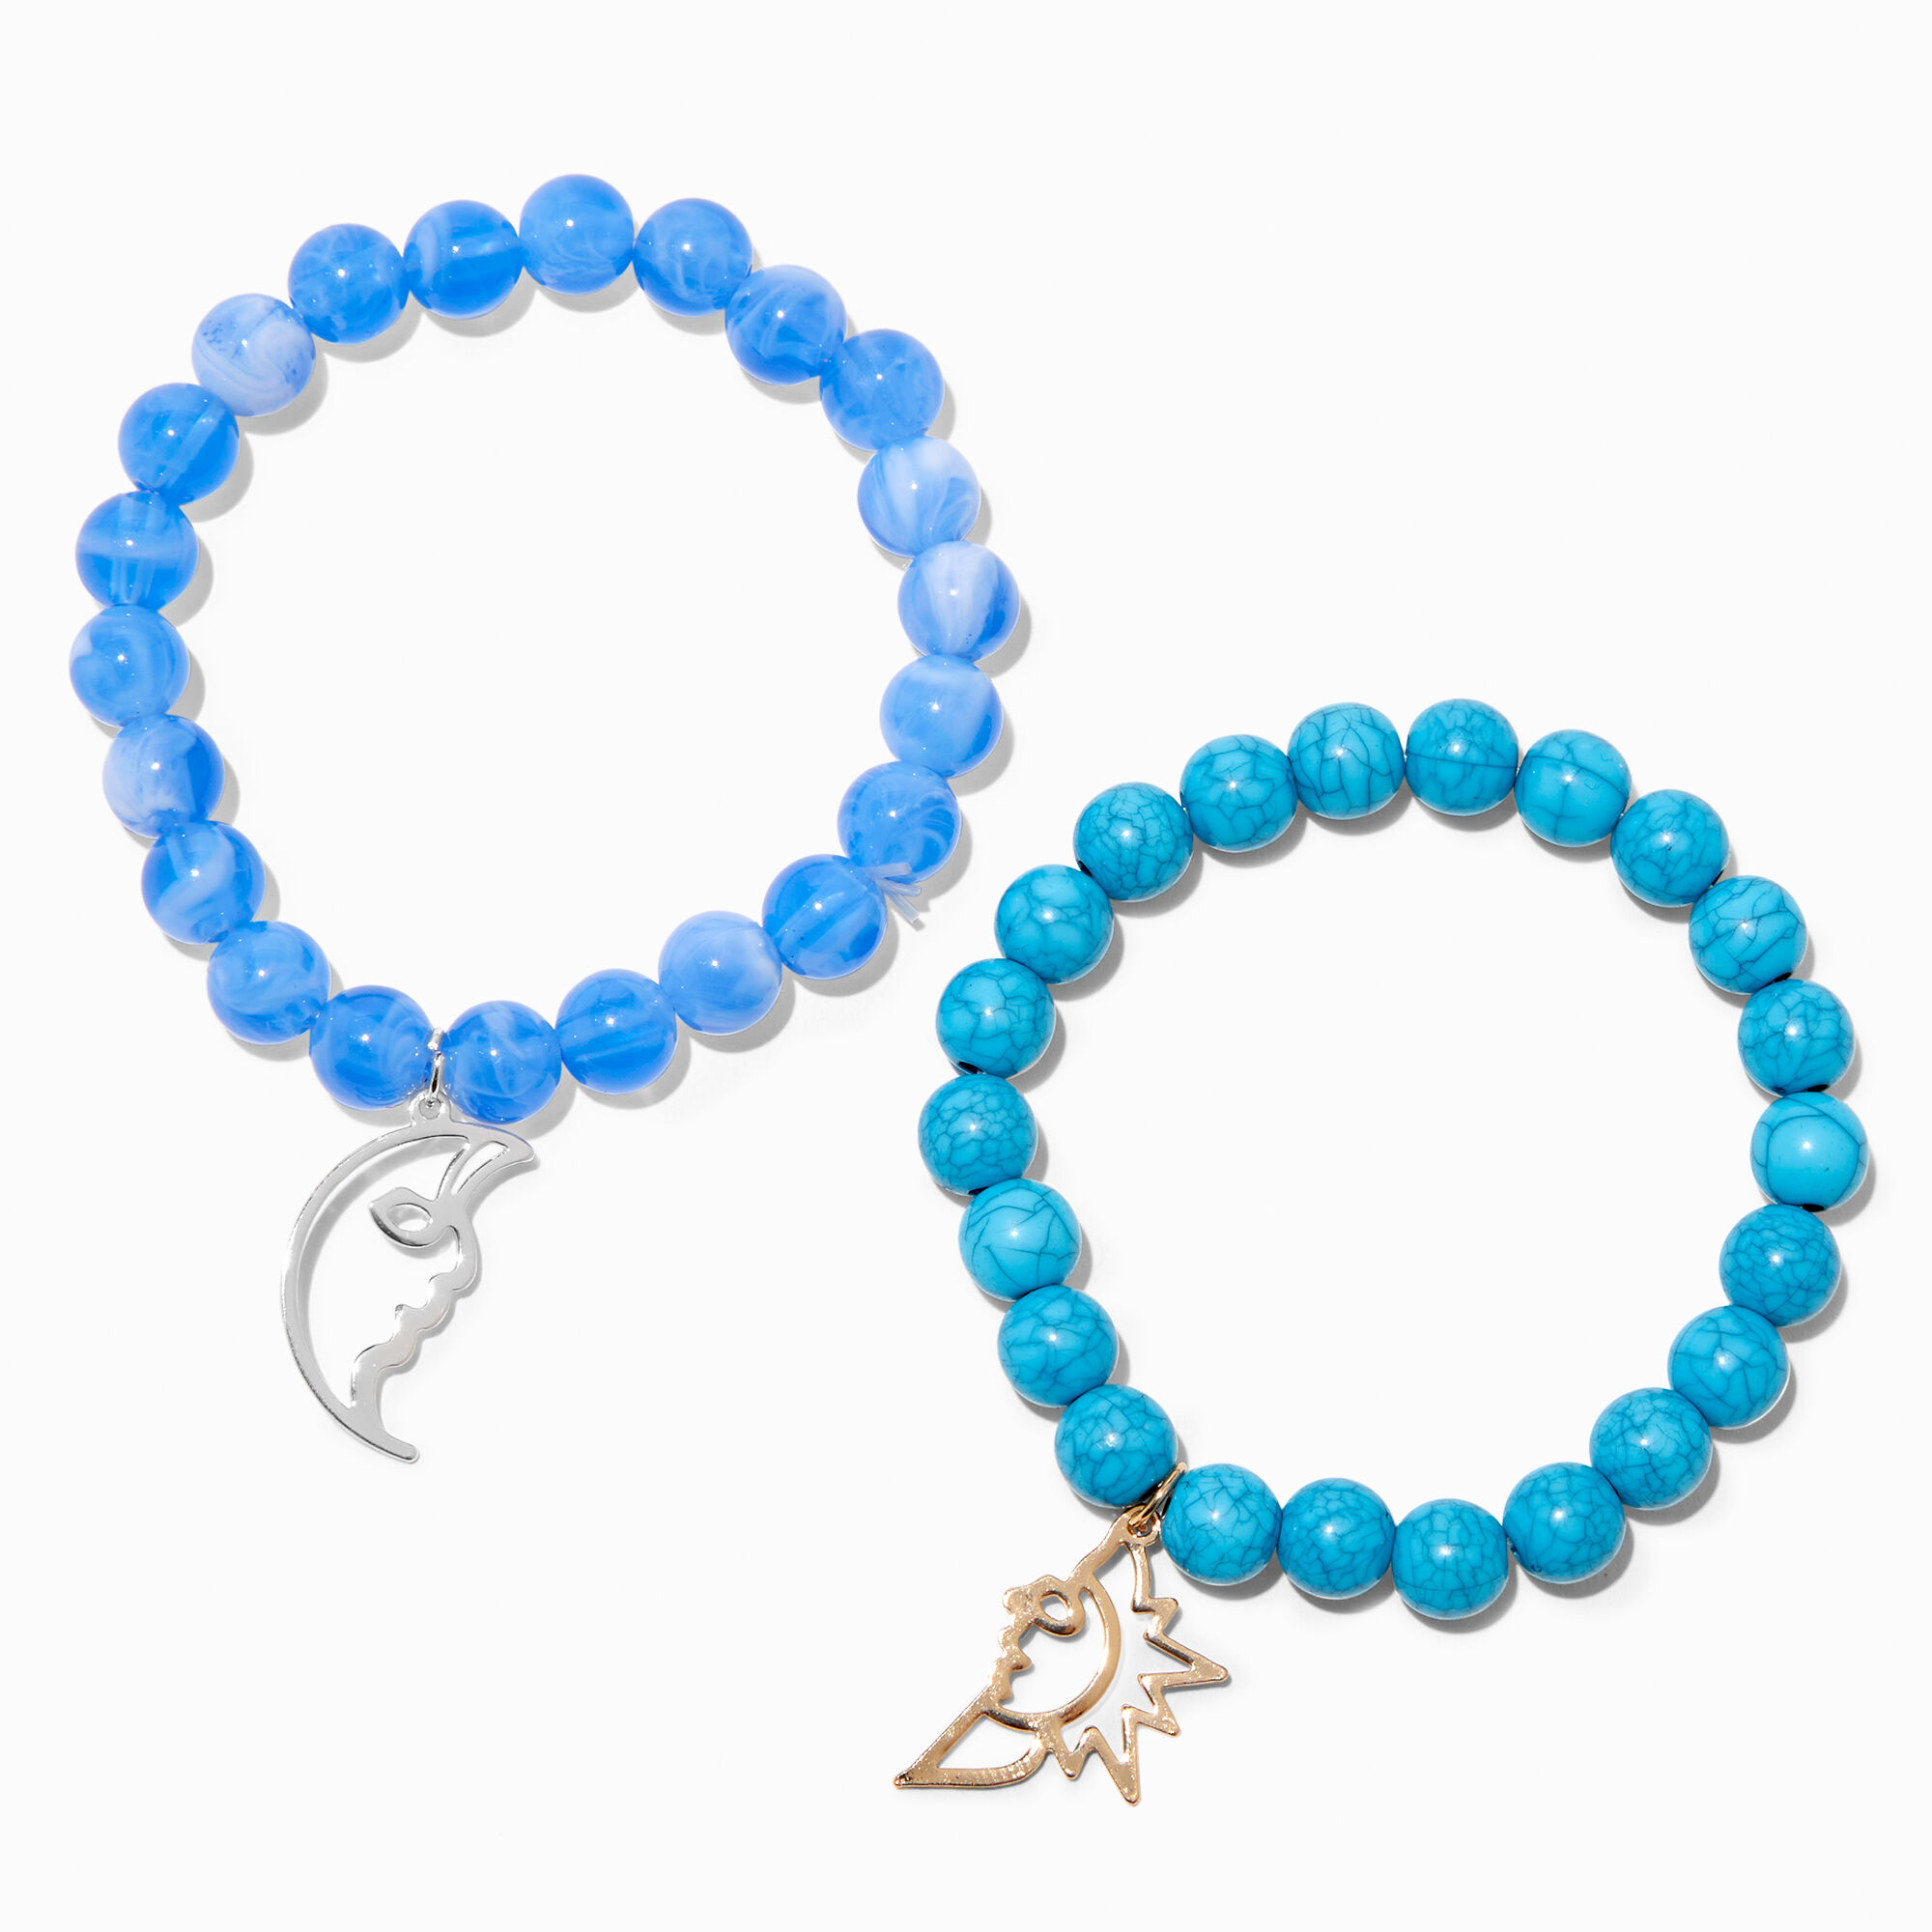 View Claires Sun Moon Beaded Stretch Bracelets 2 Pack Blue information